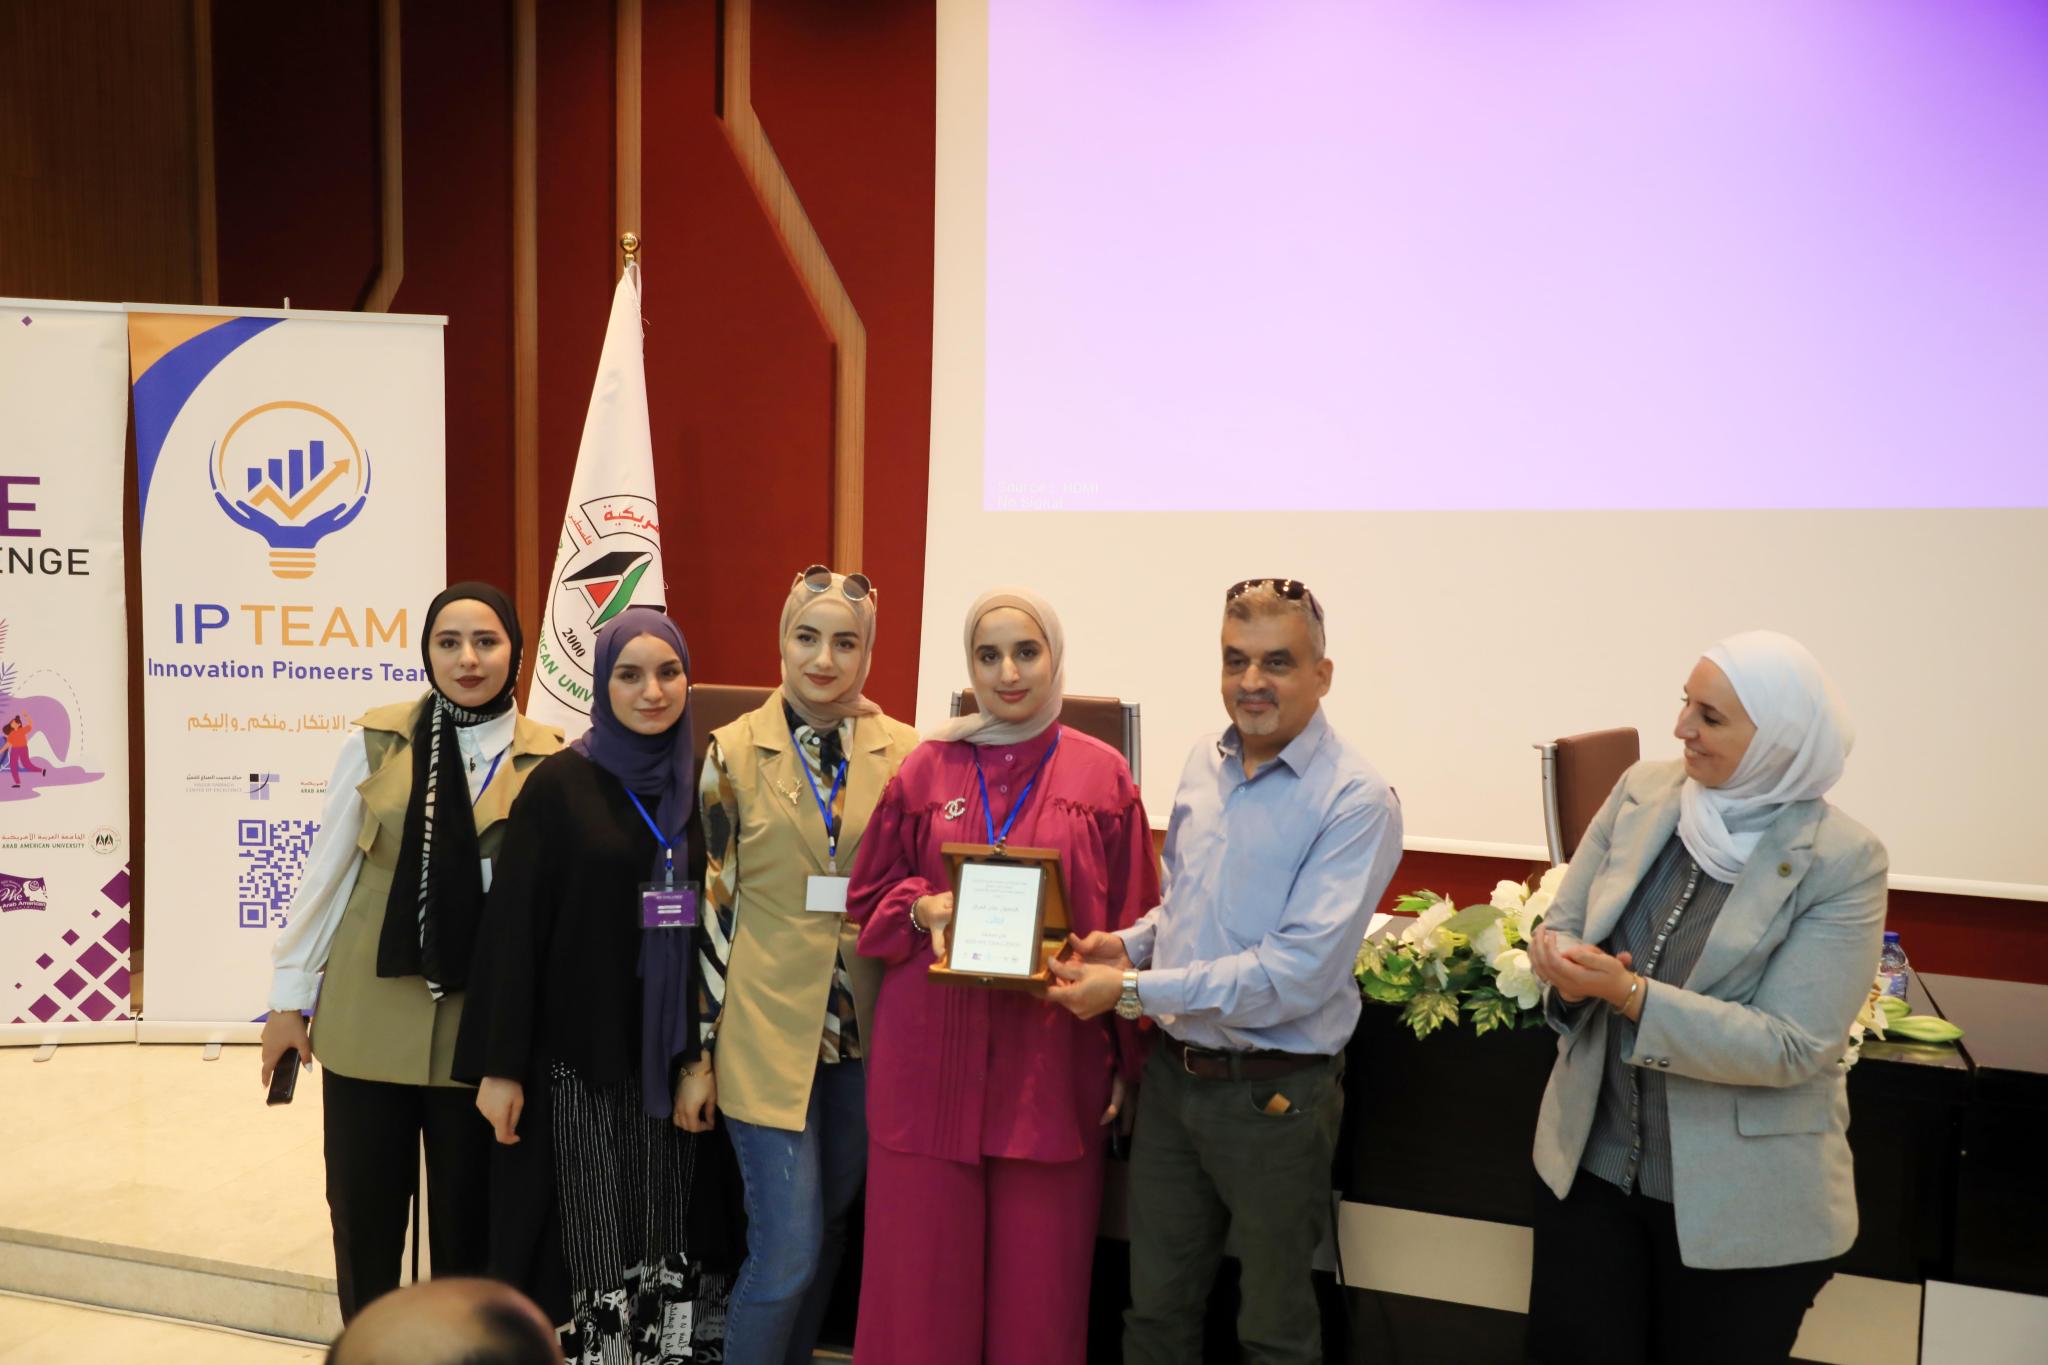 AAUP’S Hassib Sabbagh IT Center of Excellence Holds the First Challenge of Its Kind in Palestine, entitled "Women in Engineering"